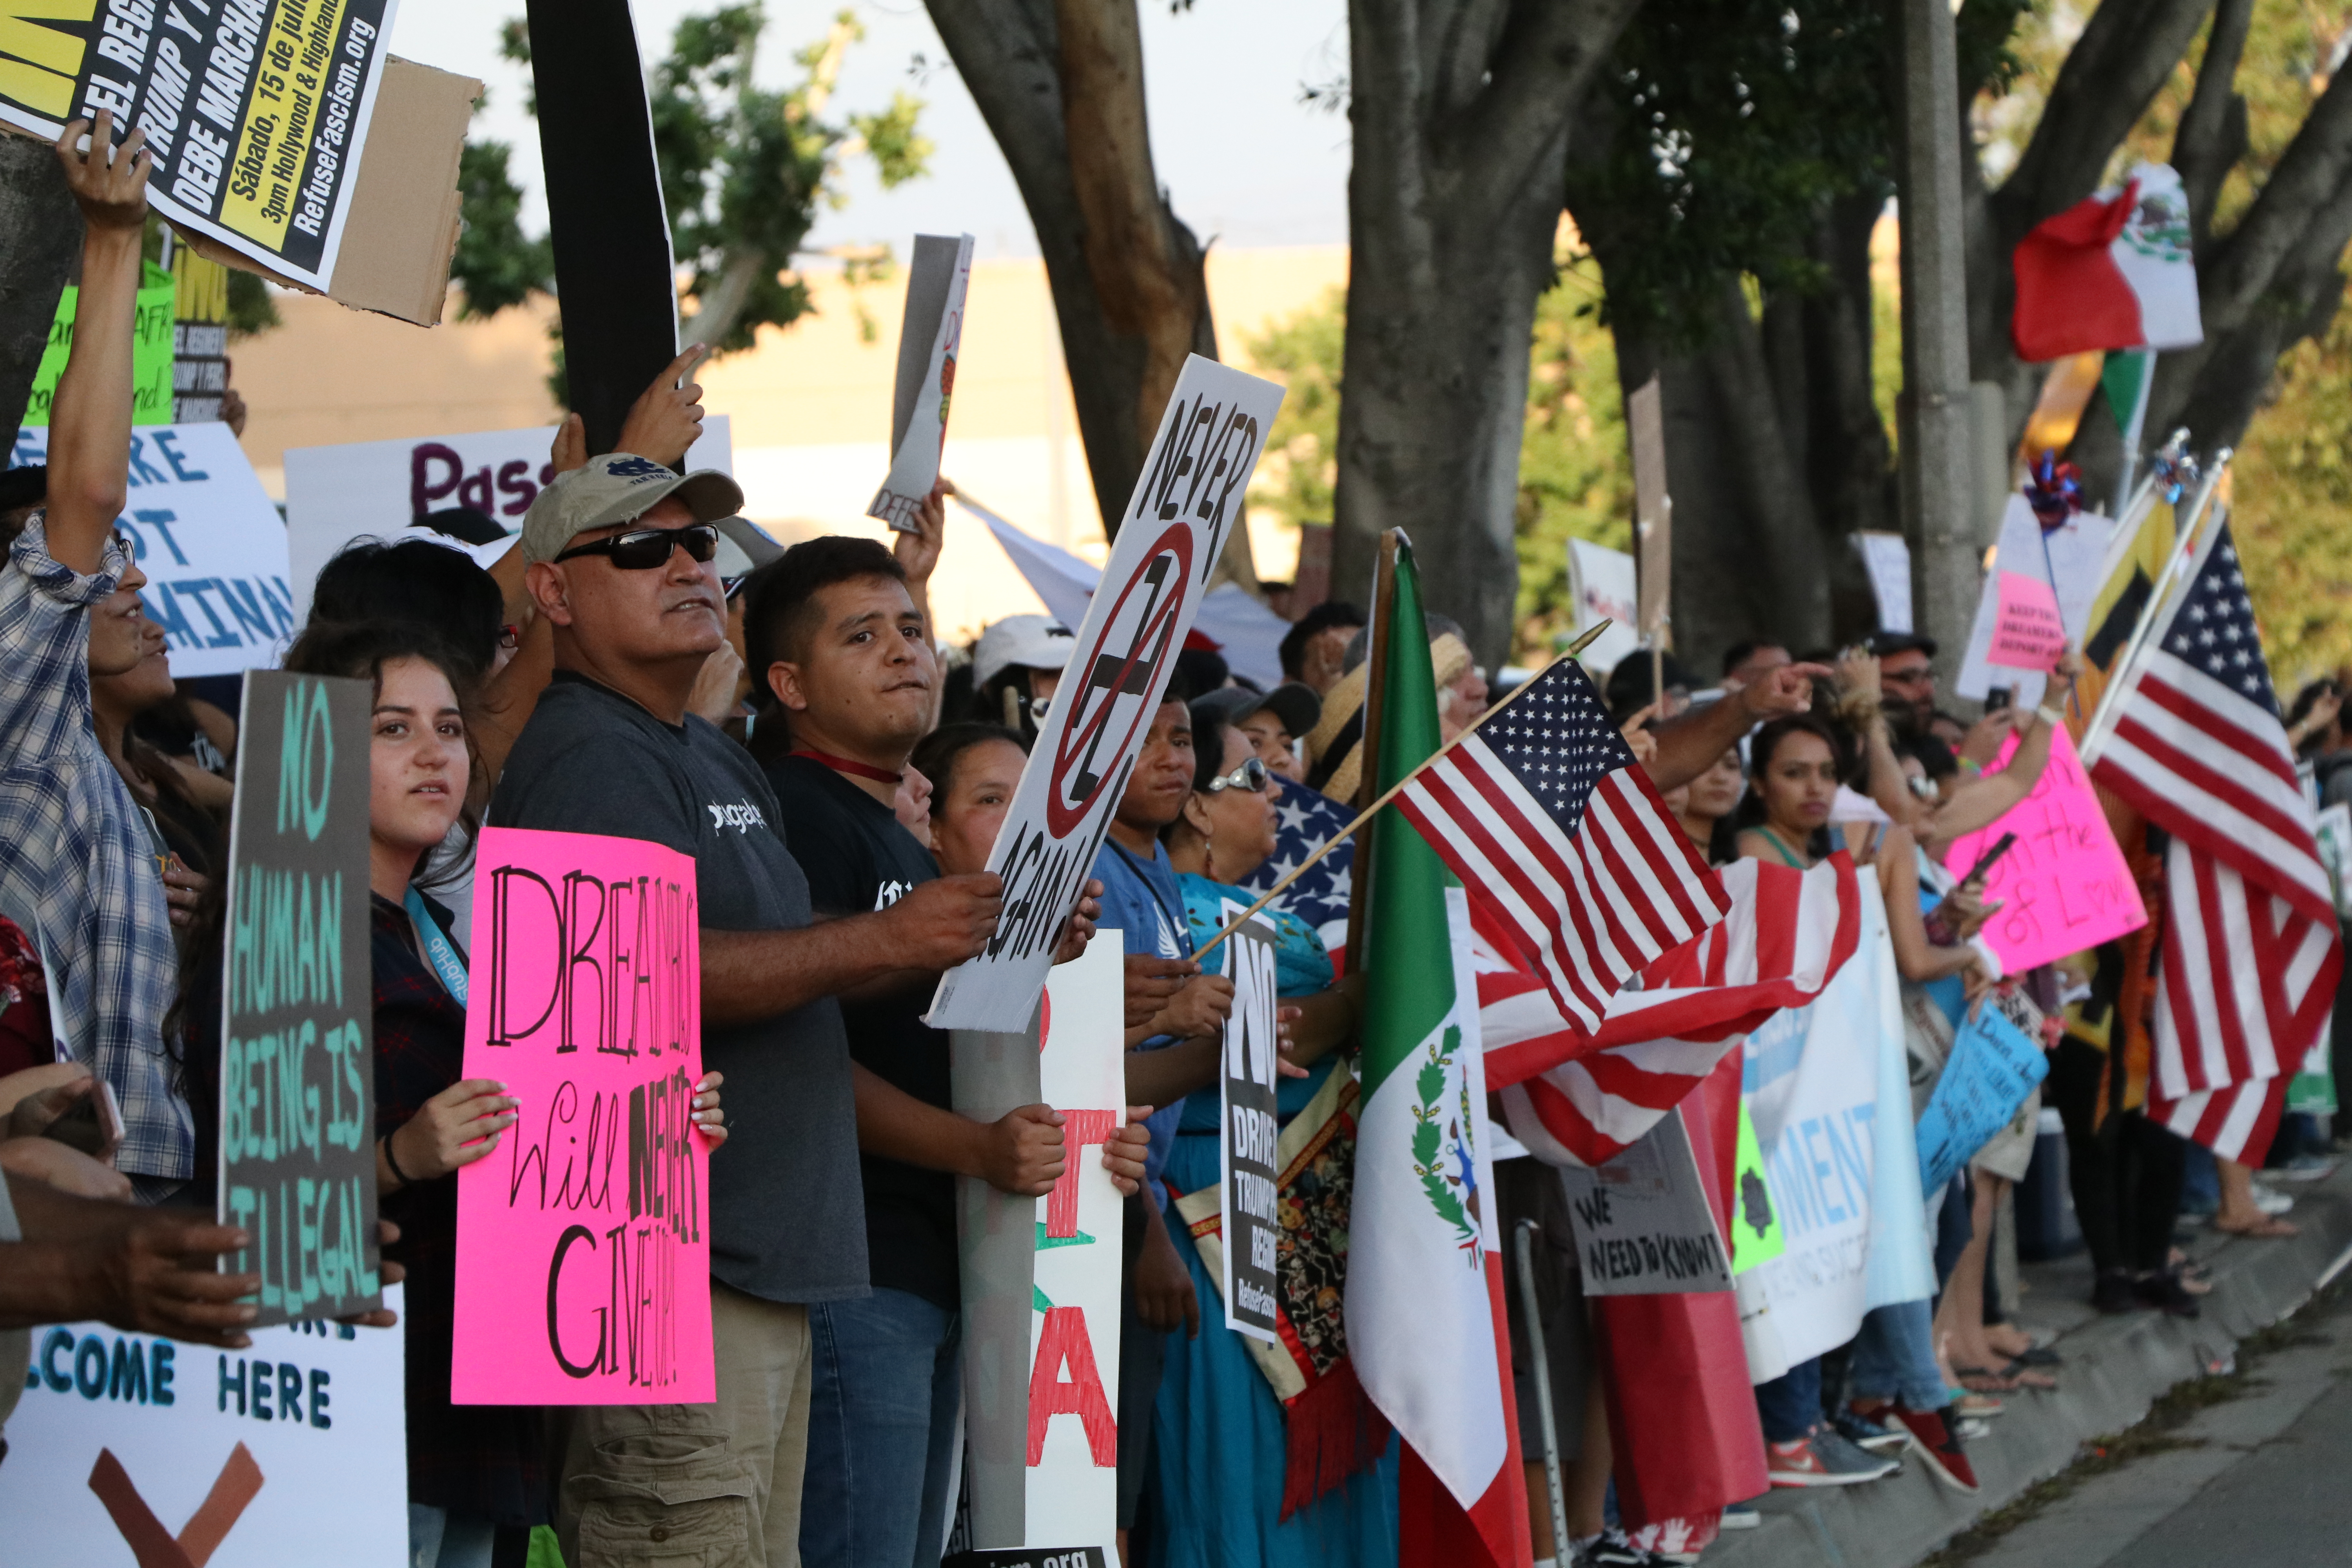 Recent DACA decision gives immigrant groups ‘greater momentum’ for Dream Act